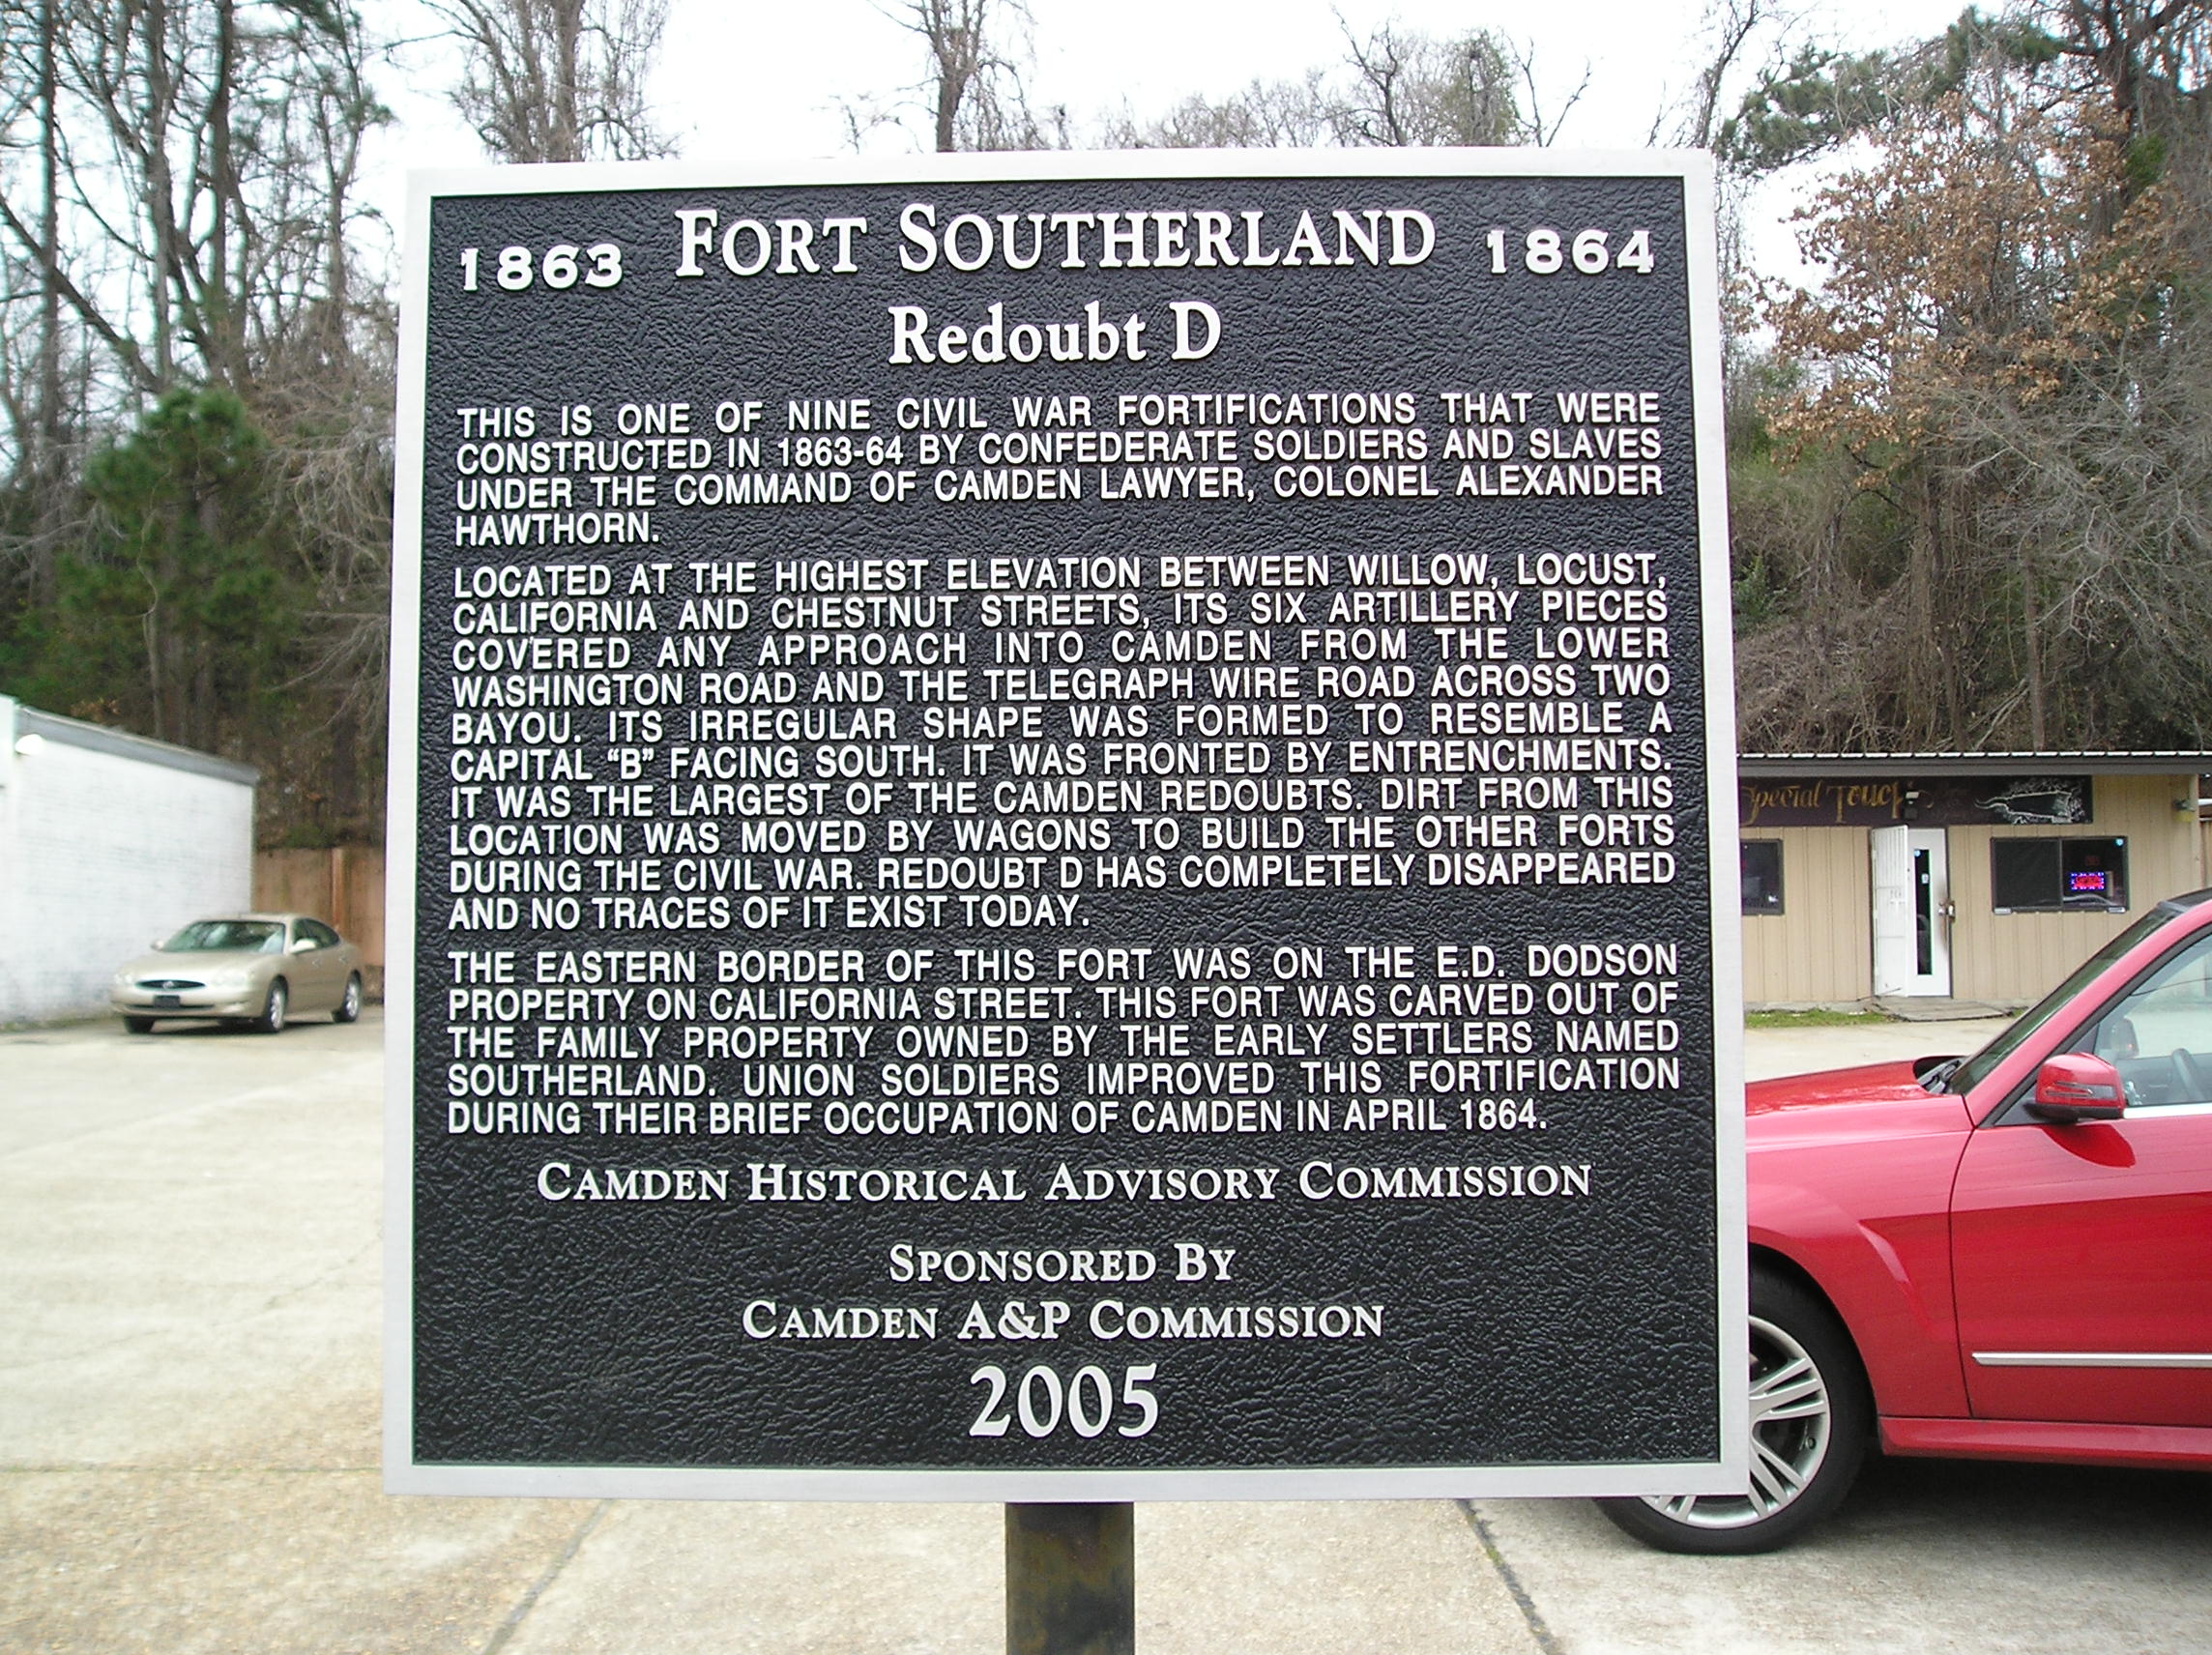 Redoubt D - Fort Southerland